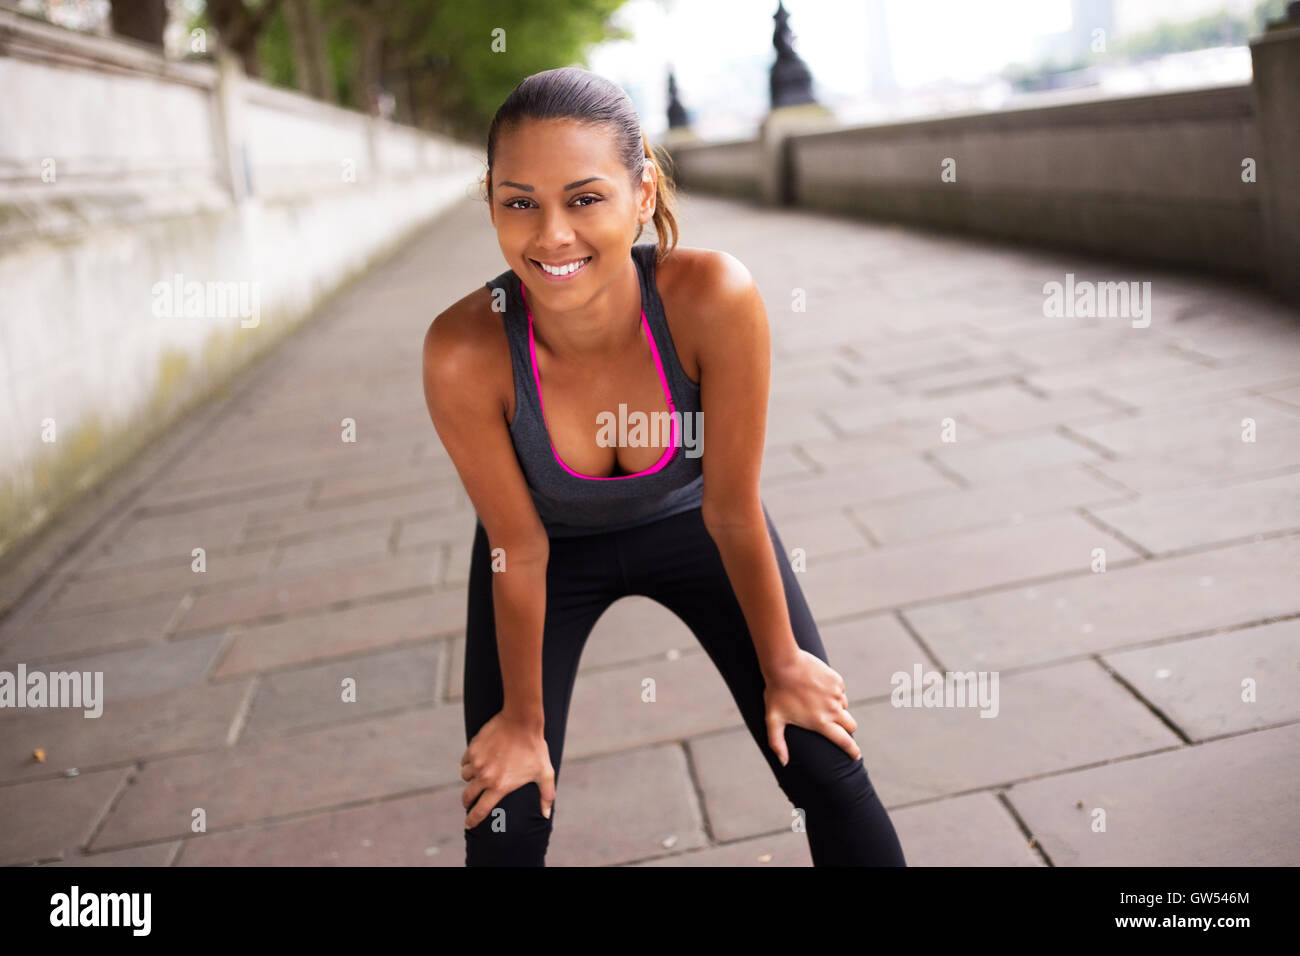 young woman catching her breath while exercising Stock Photo